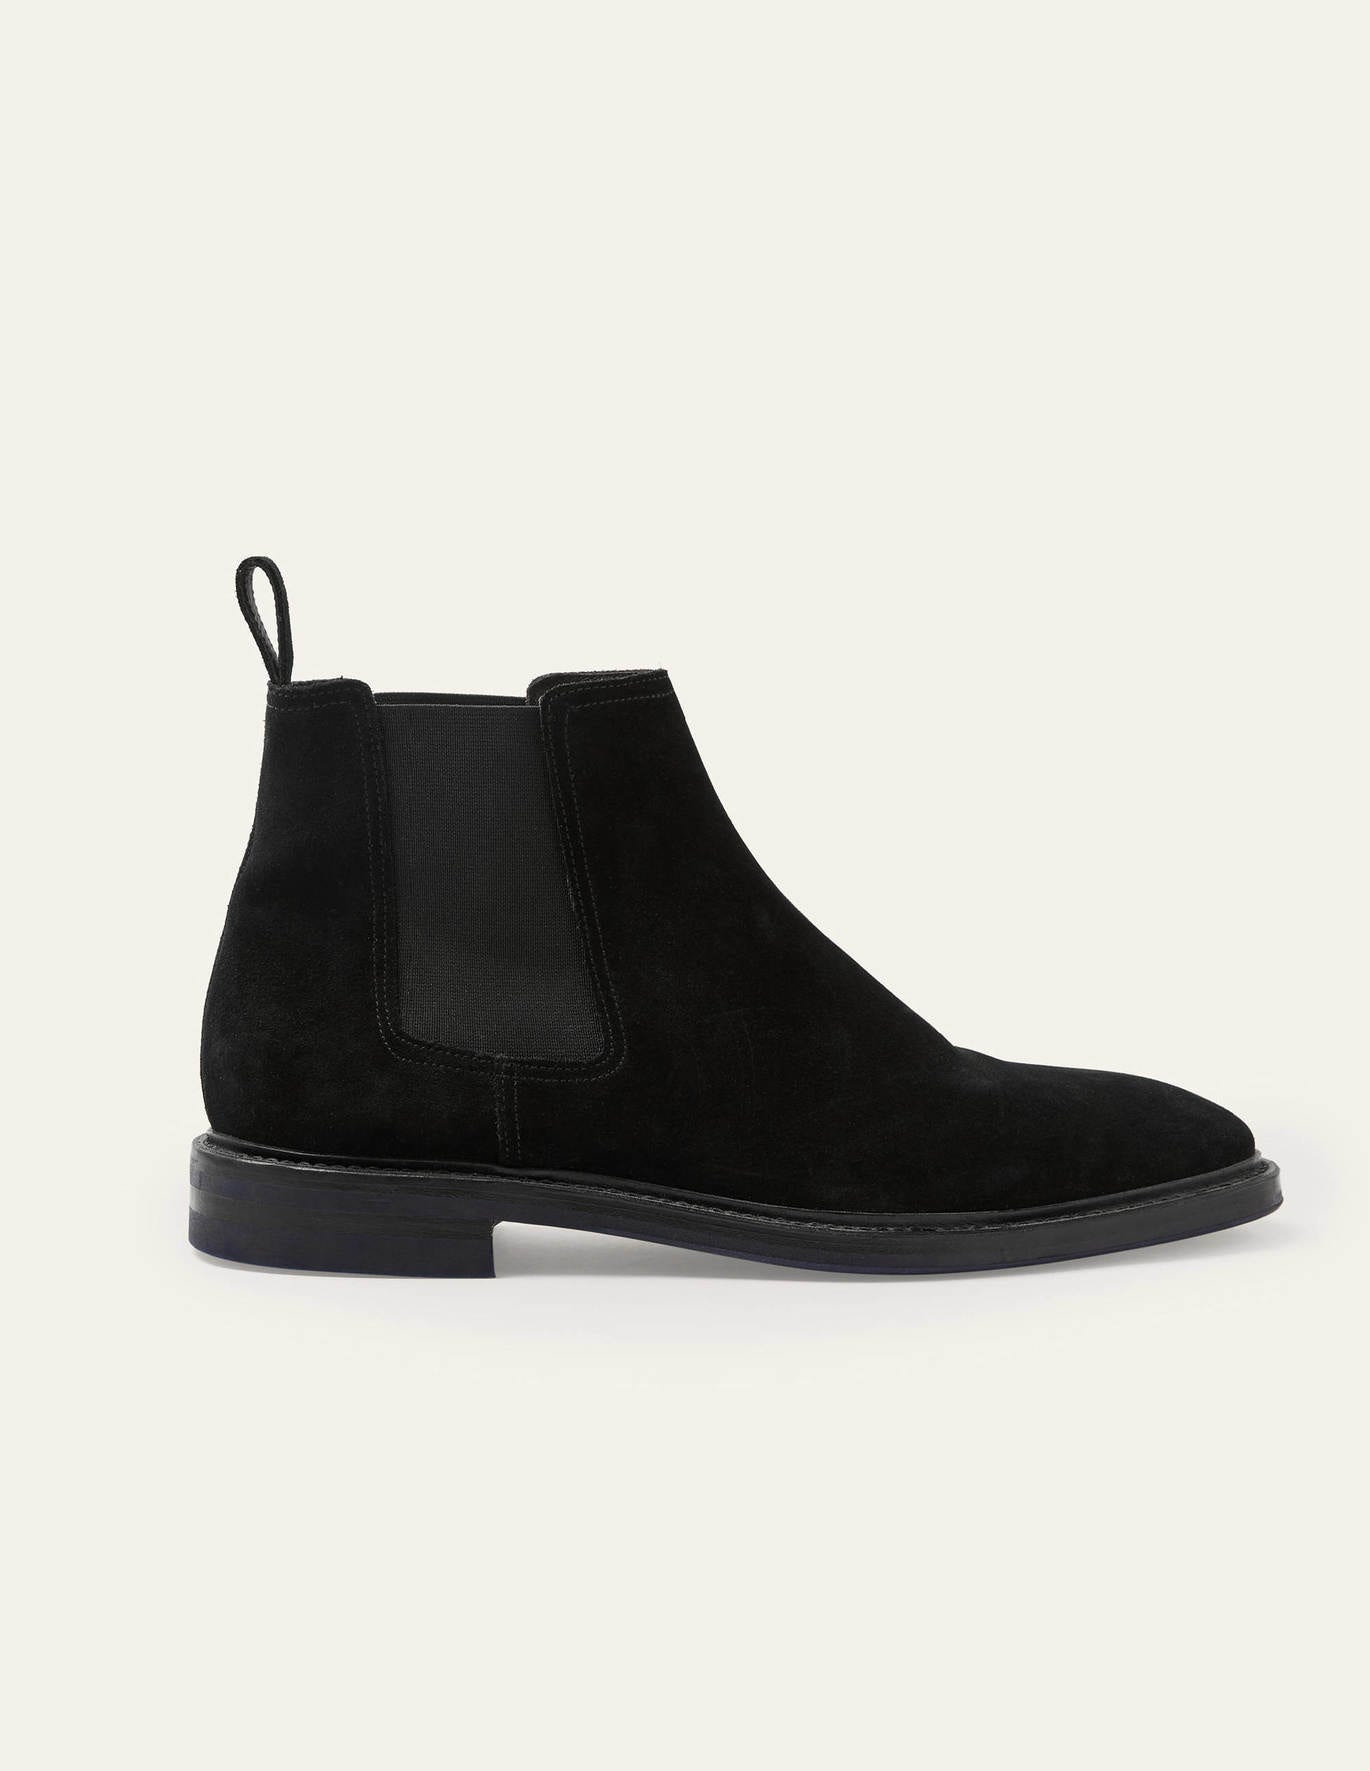 Boden Corby Chelsea Boots - Black Suede